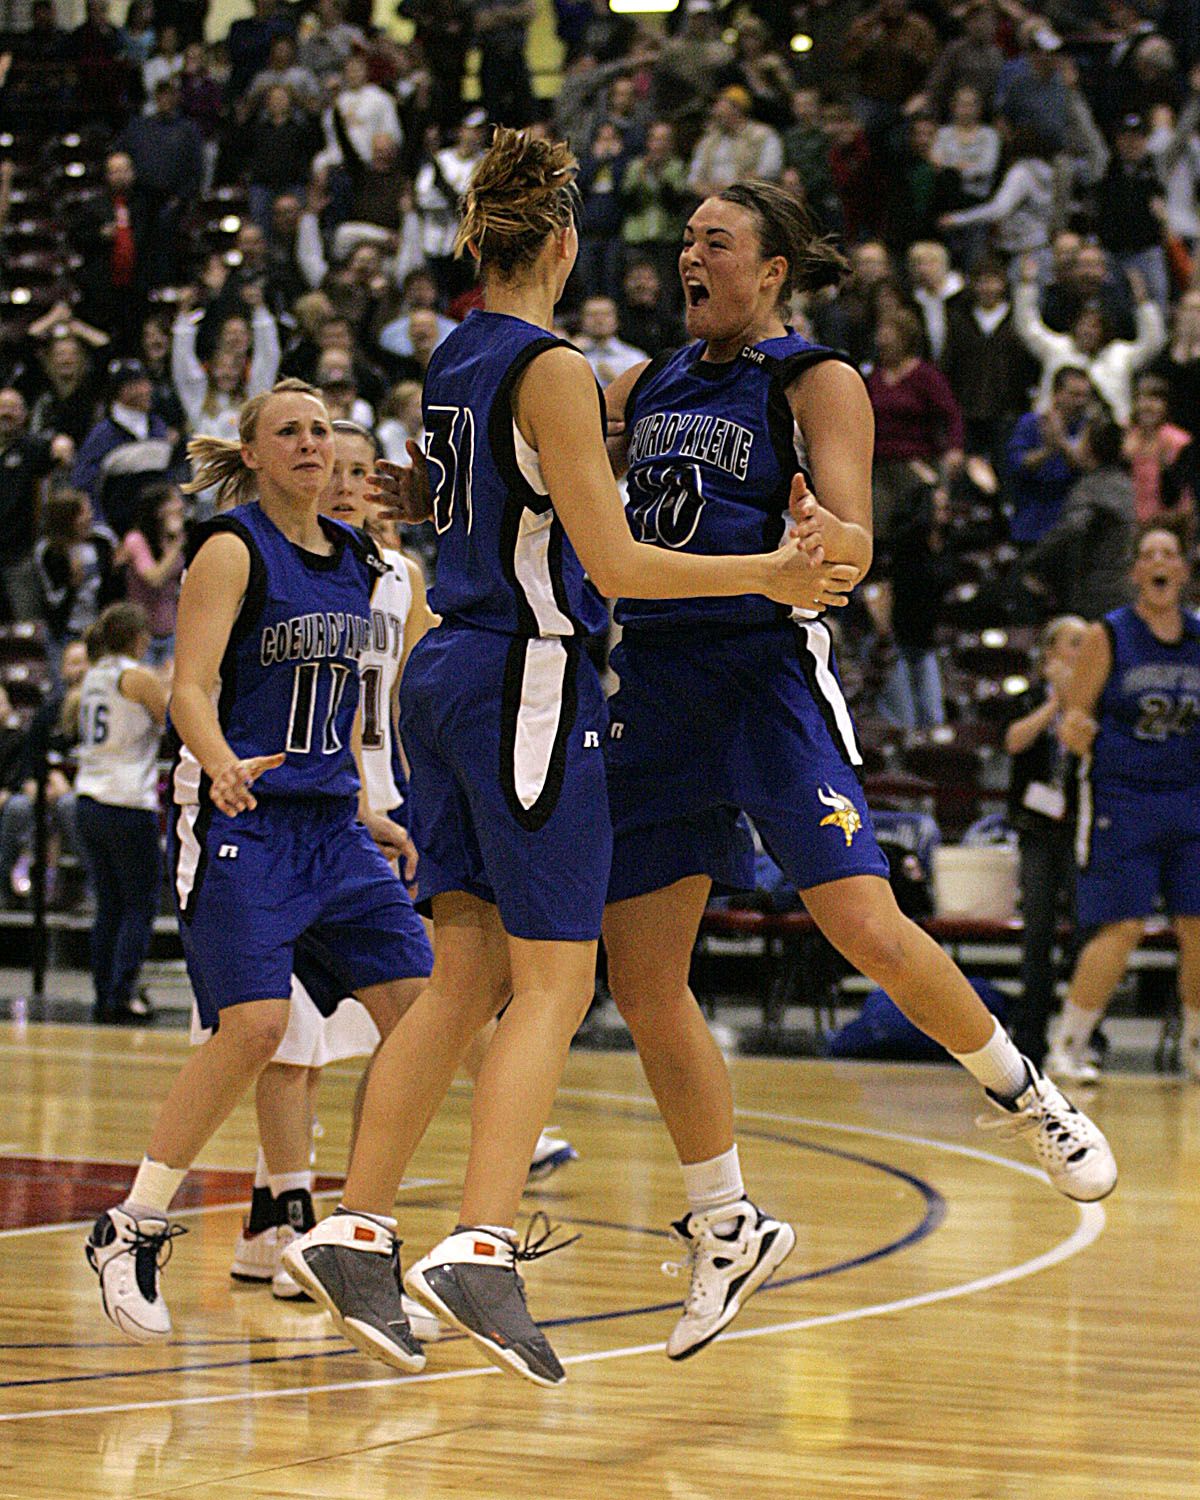 CdA’s Kama Griffitts exults in a huge basket by Whitney Heleker, center, as Sadie Simon looks on. (Steve Conner Photography / The Spokesman-Review)